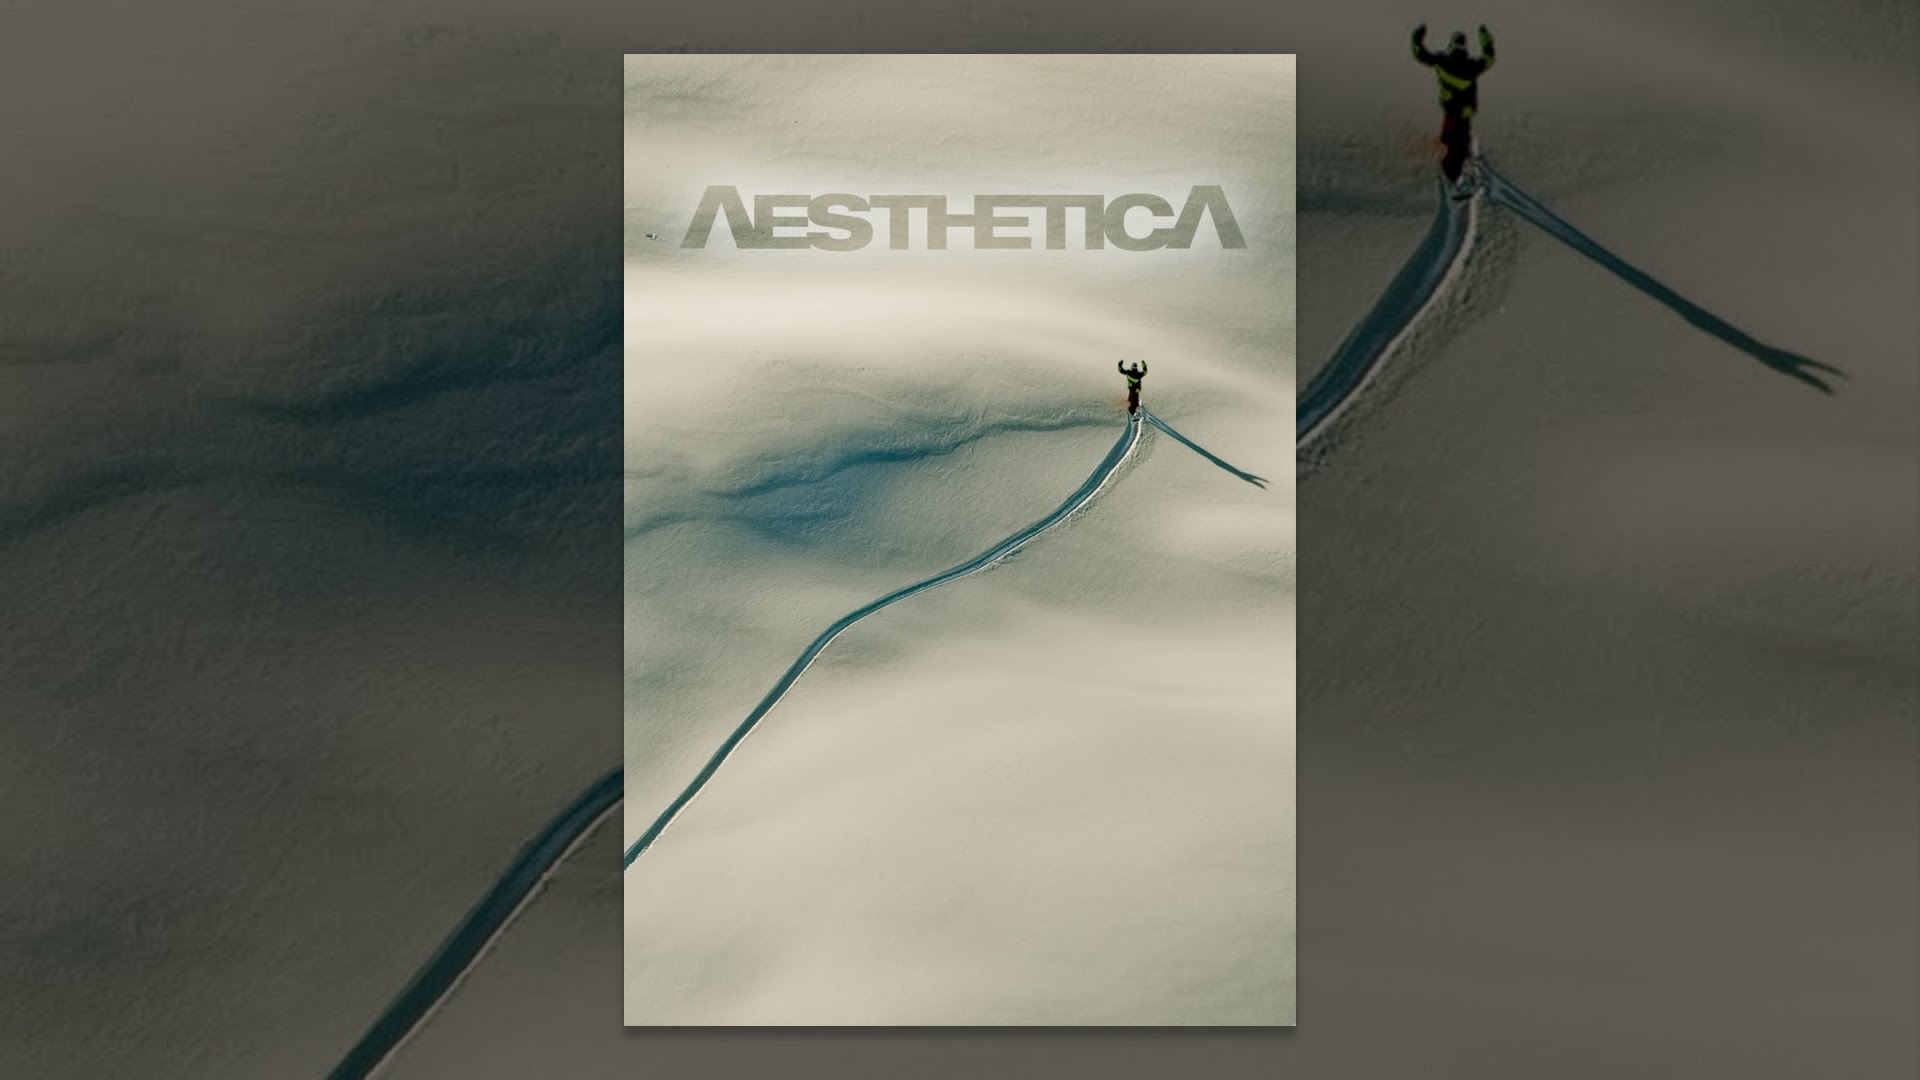 Aesthetica: A Standard Films Production